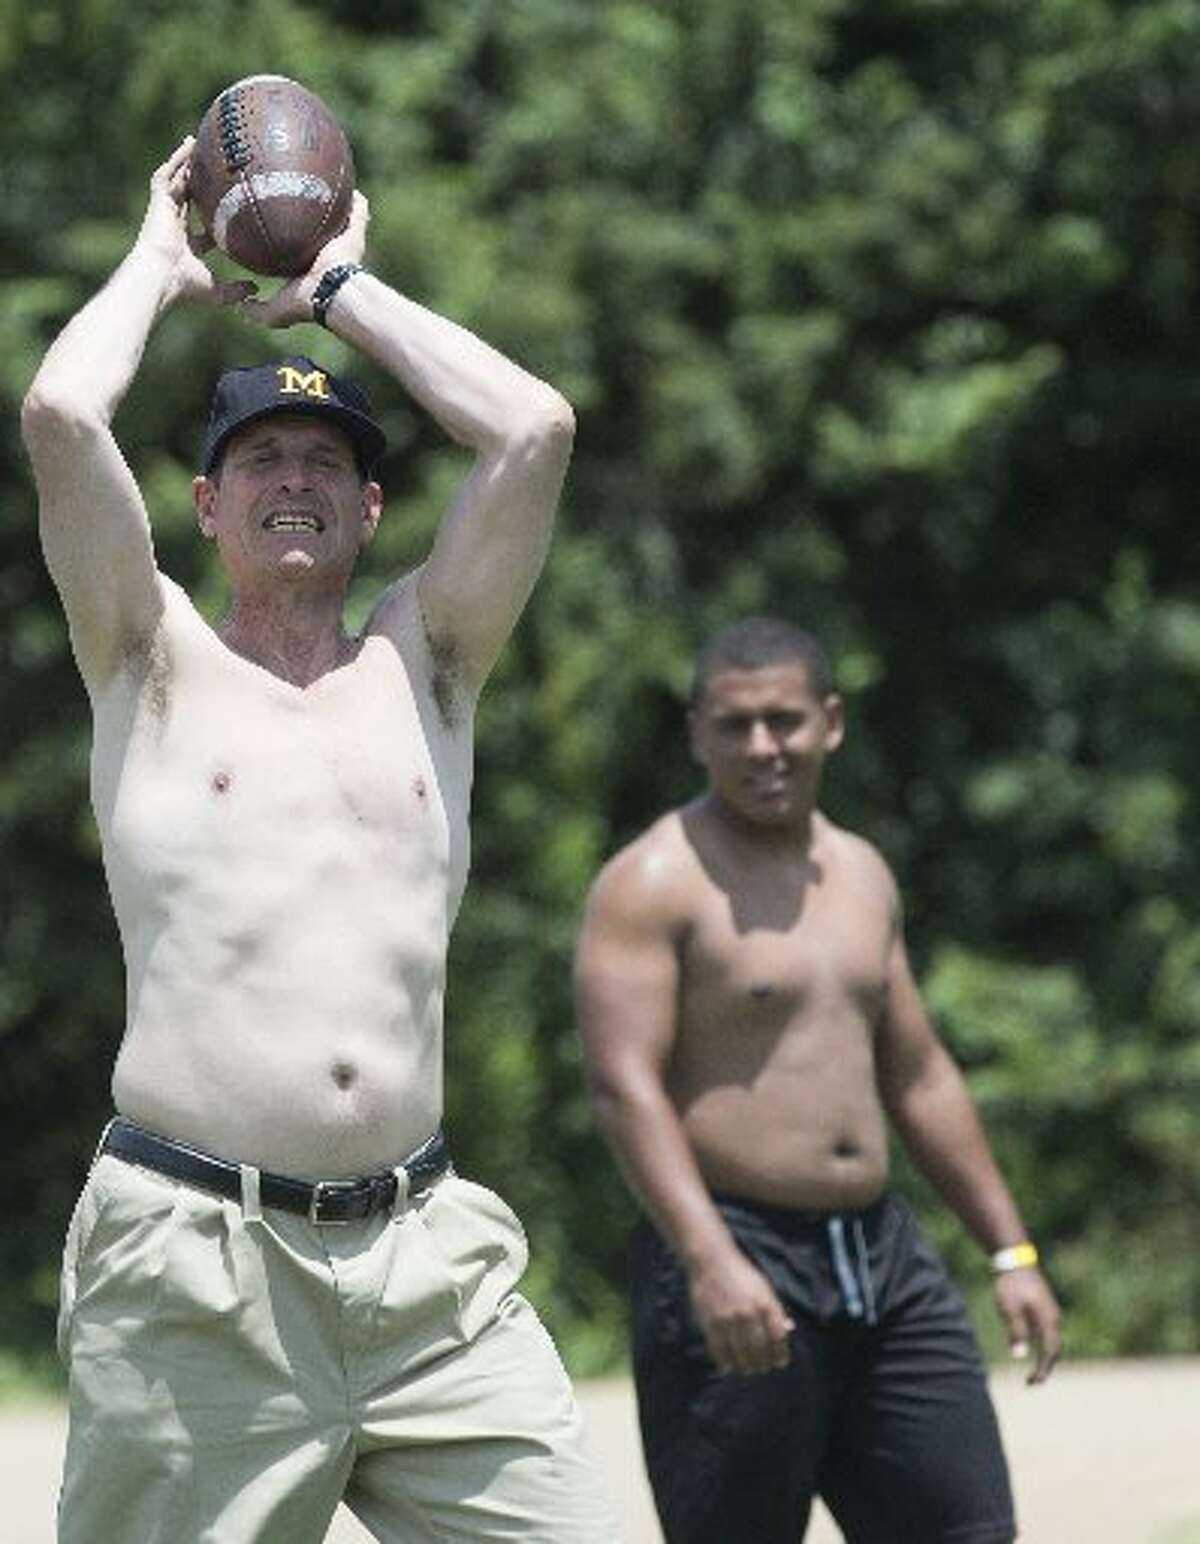 Michigan football coach Jim Harbaugh plays shirtless with participants during the Coach Jim Harbaugh's Elite Summer Football Camp, Friday, June 5, 2015, at Prattville High School in Prattville, Ala.